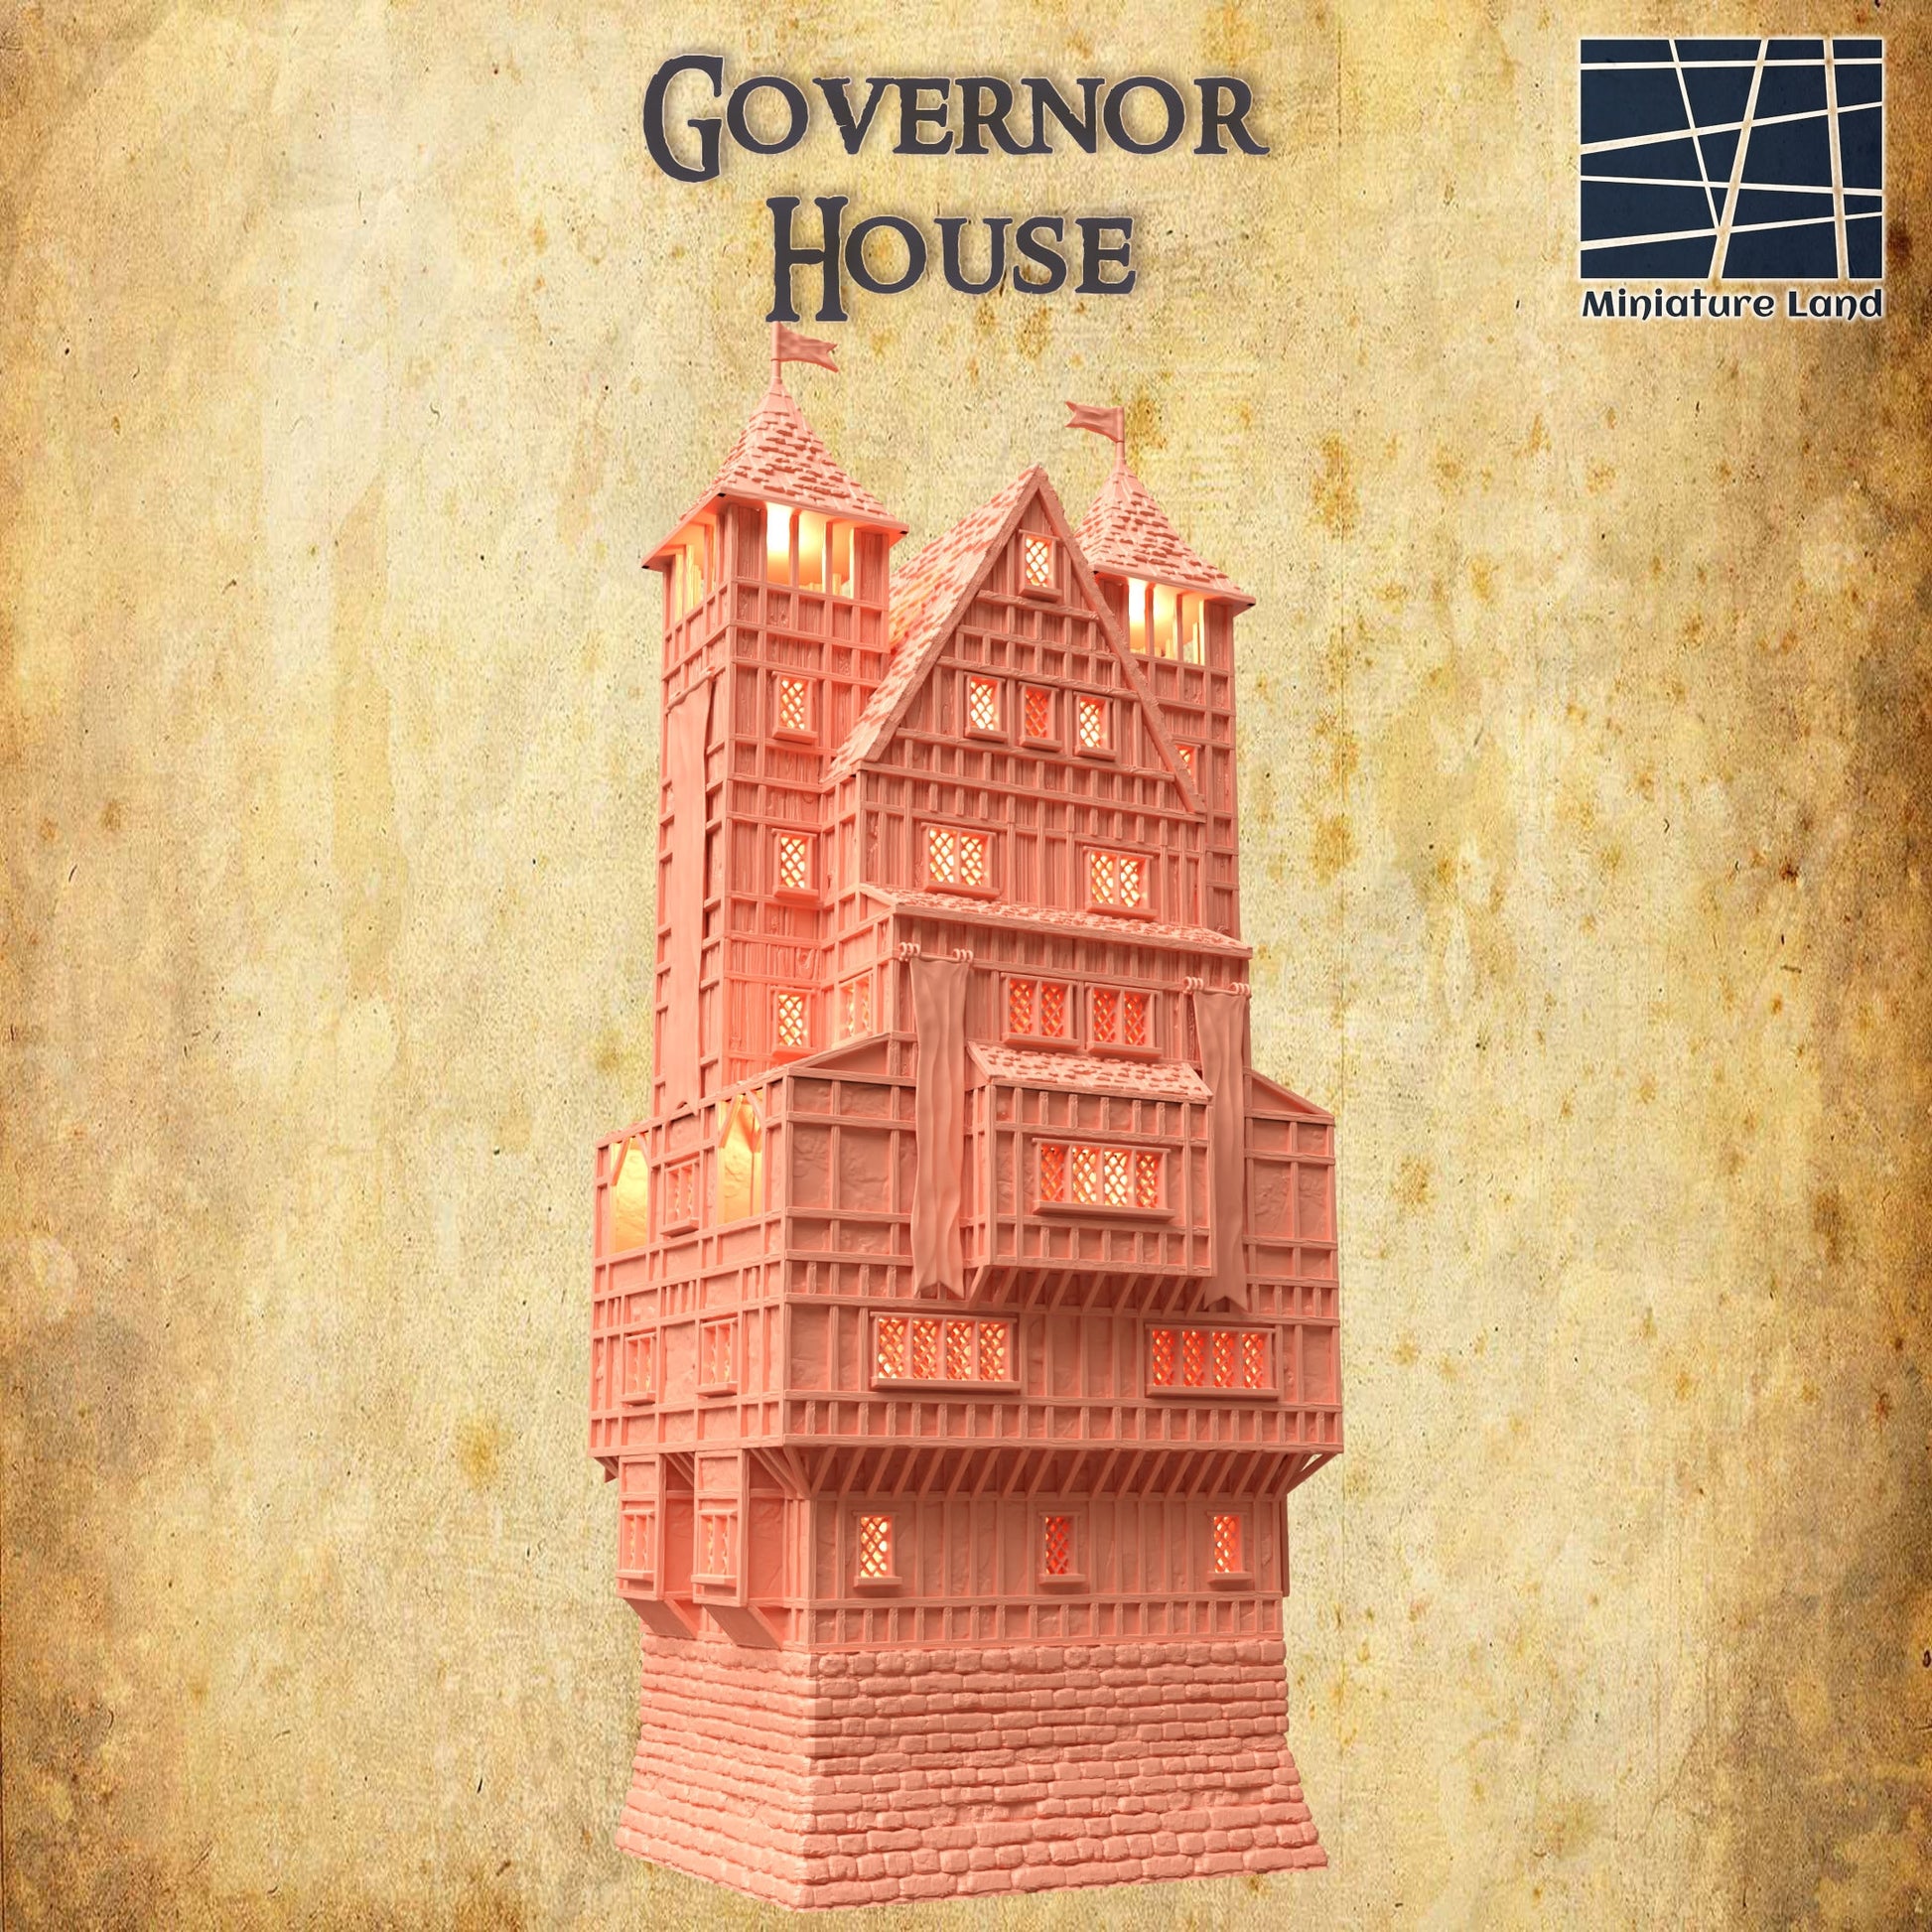 Governor House City Building Mansion High Rise building 7 Stories,City Terrain